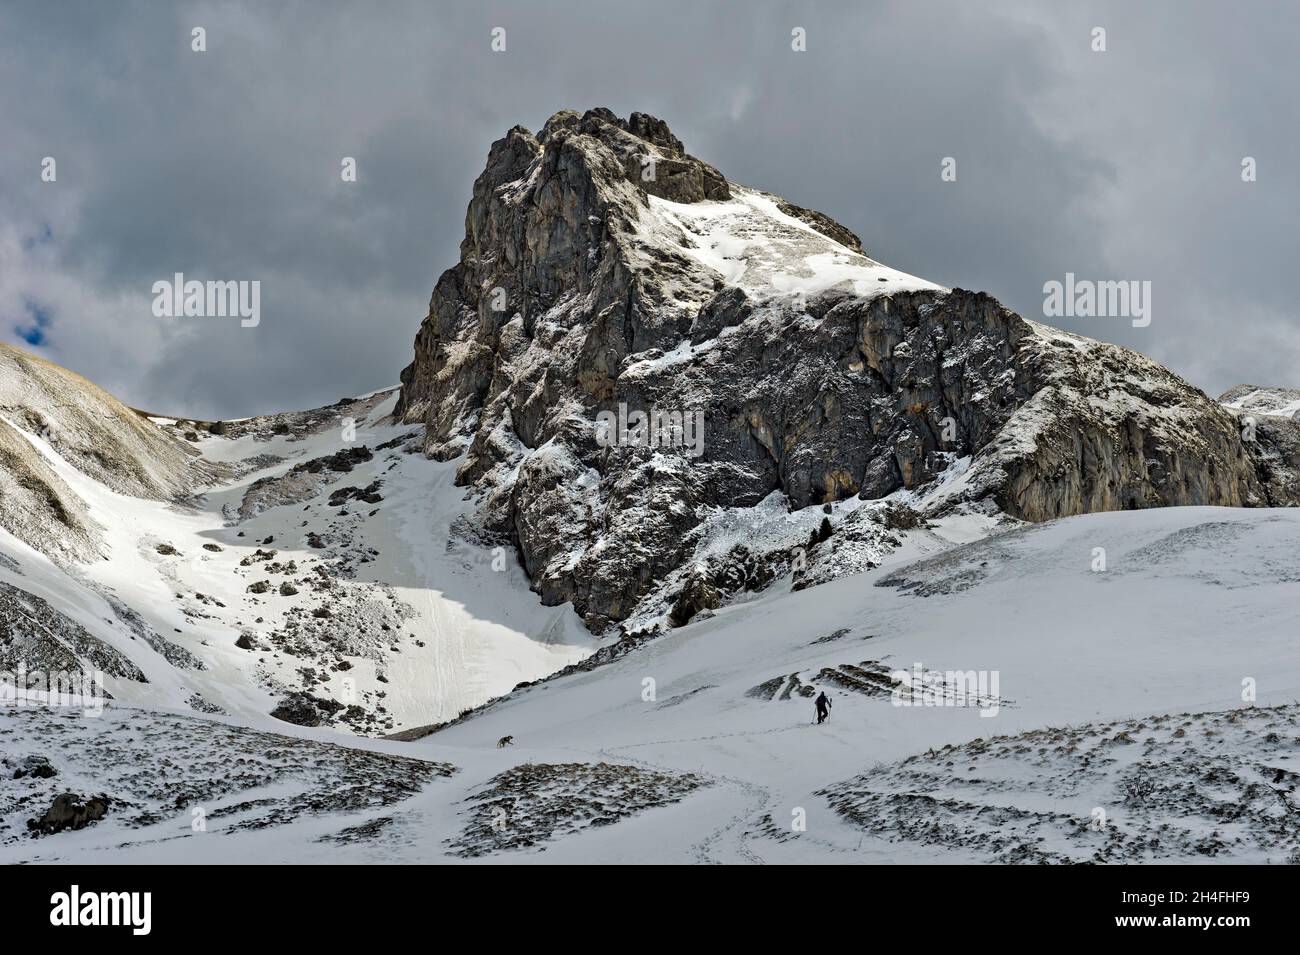 Winter landscape in the French Chablais with the peak Château d'Oche, Bernex, France Stock Photo